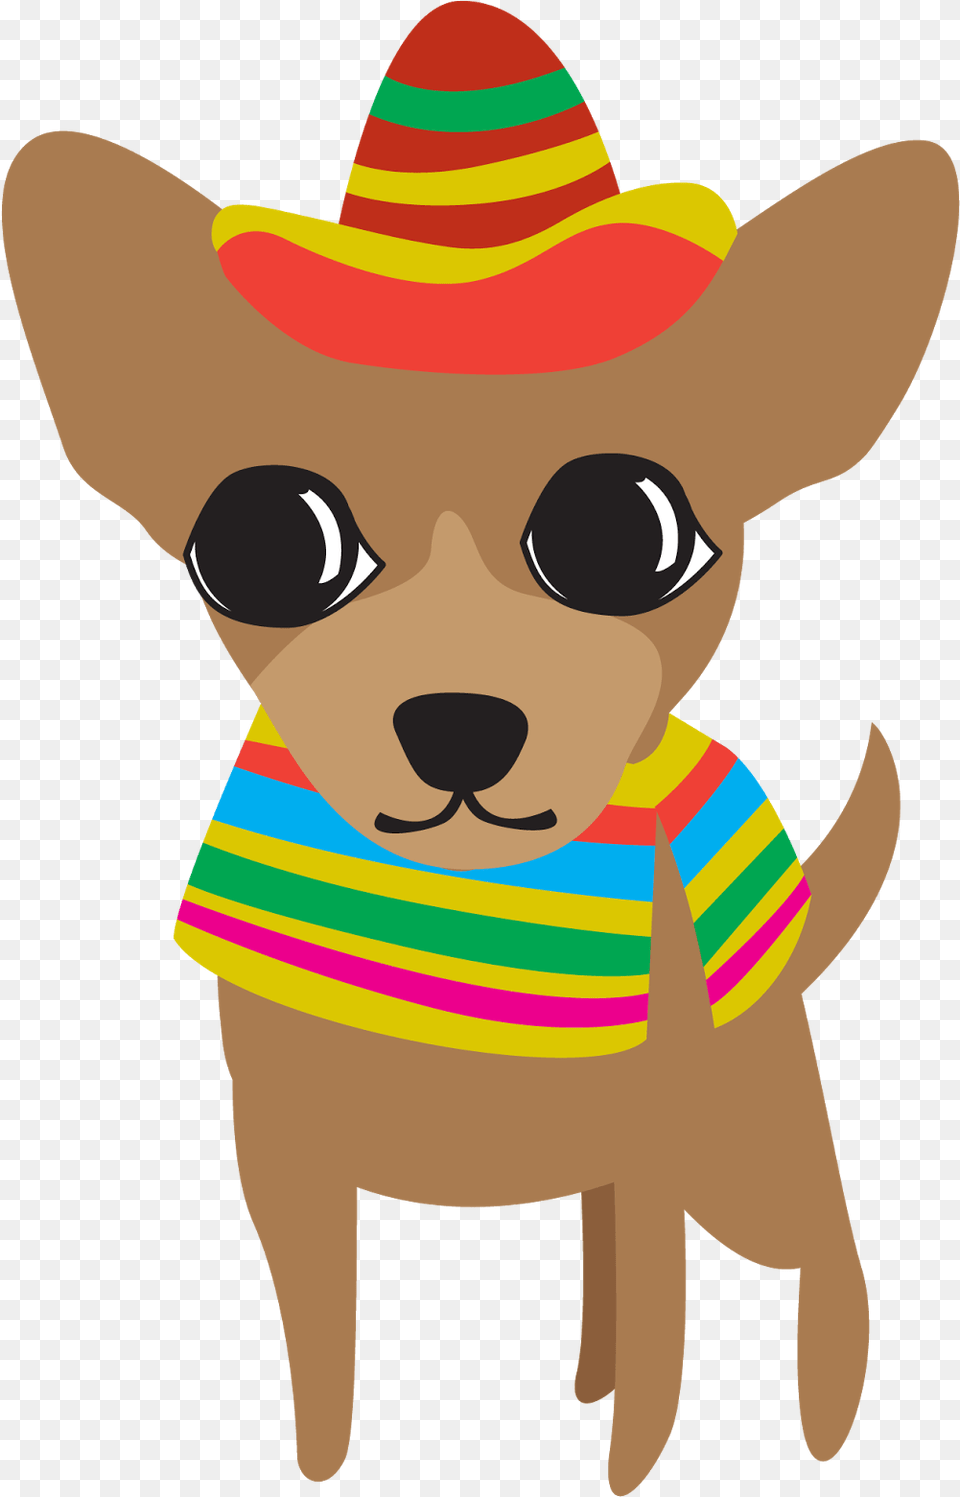 Jpg Royalty Chihuahua On Dumielauxepices Cinco De Mayo Clip Art, Clothing, Hat, Baby, Person Png Image